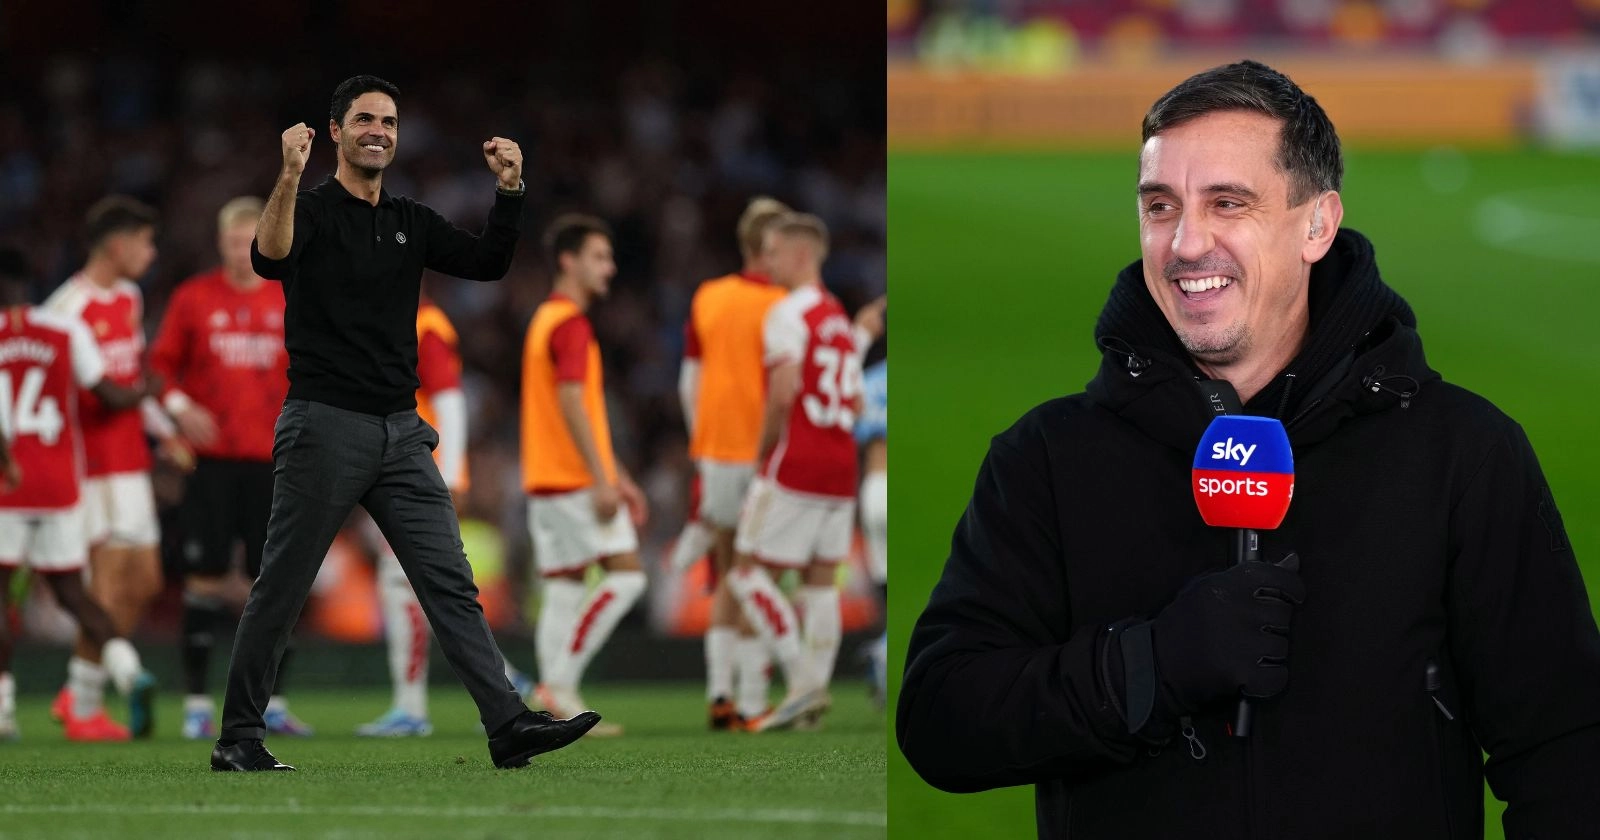 Chelsea vs Arsenal: Gary Neville Shocks Everyone With His Prediction For The Game